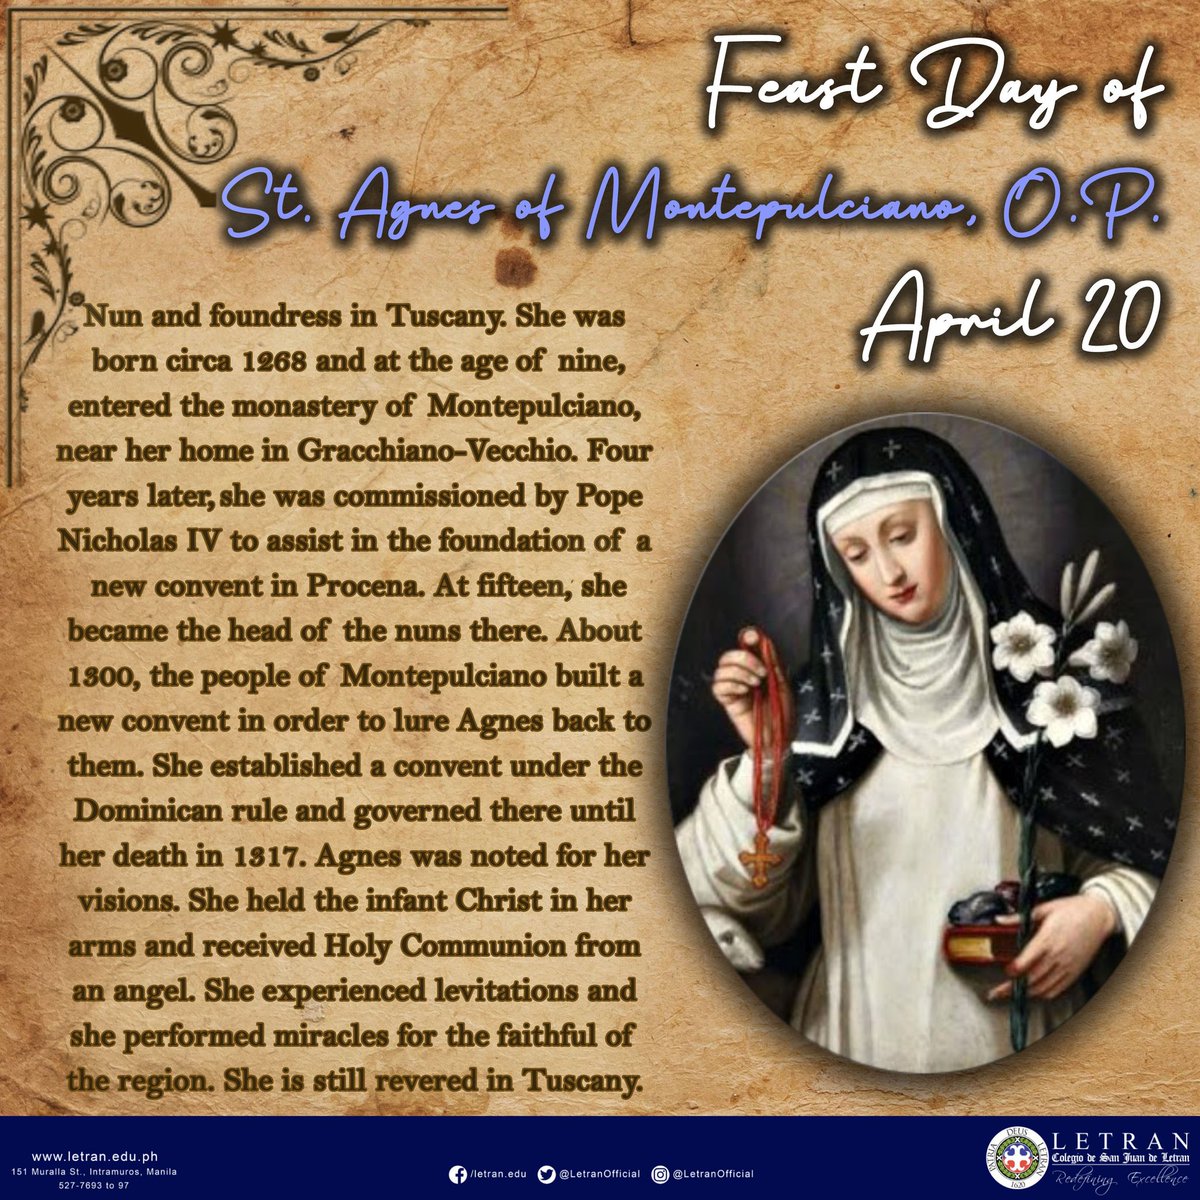 St Agnes of Montepulciano O.P. (1268-1317) Religious Nun and Abbess “The Miracle Worker” – Attributes – Dominican Nun with a lily and a lamb.   Her Body is incorrupt and her major Shrine is Church of St Agnes, Montepulicano, Siena, Italy 

St. Agnes of Montepulciano, pray for us!